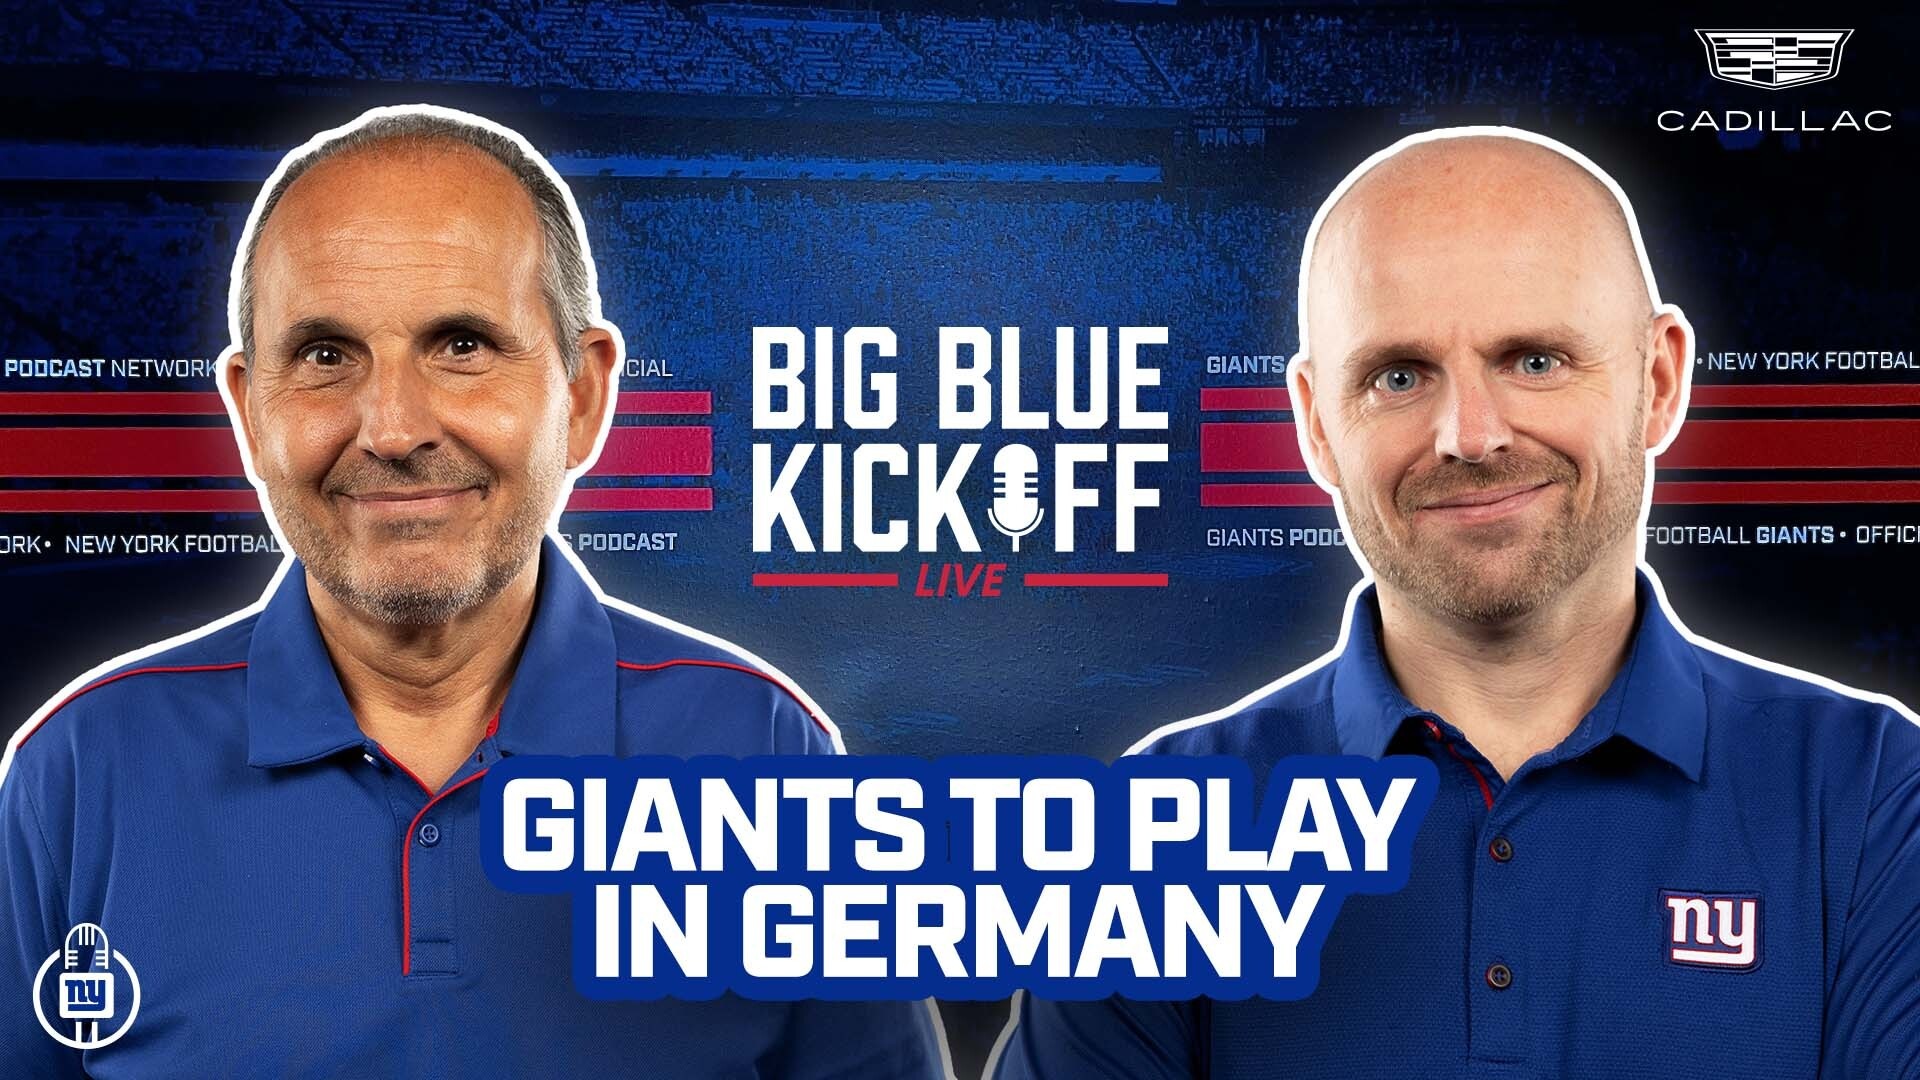 Big Blue Kickoff Live 5/15 | Giants to Play in Germany